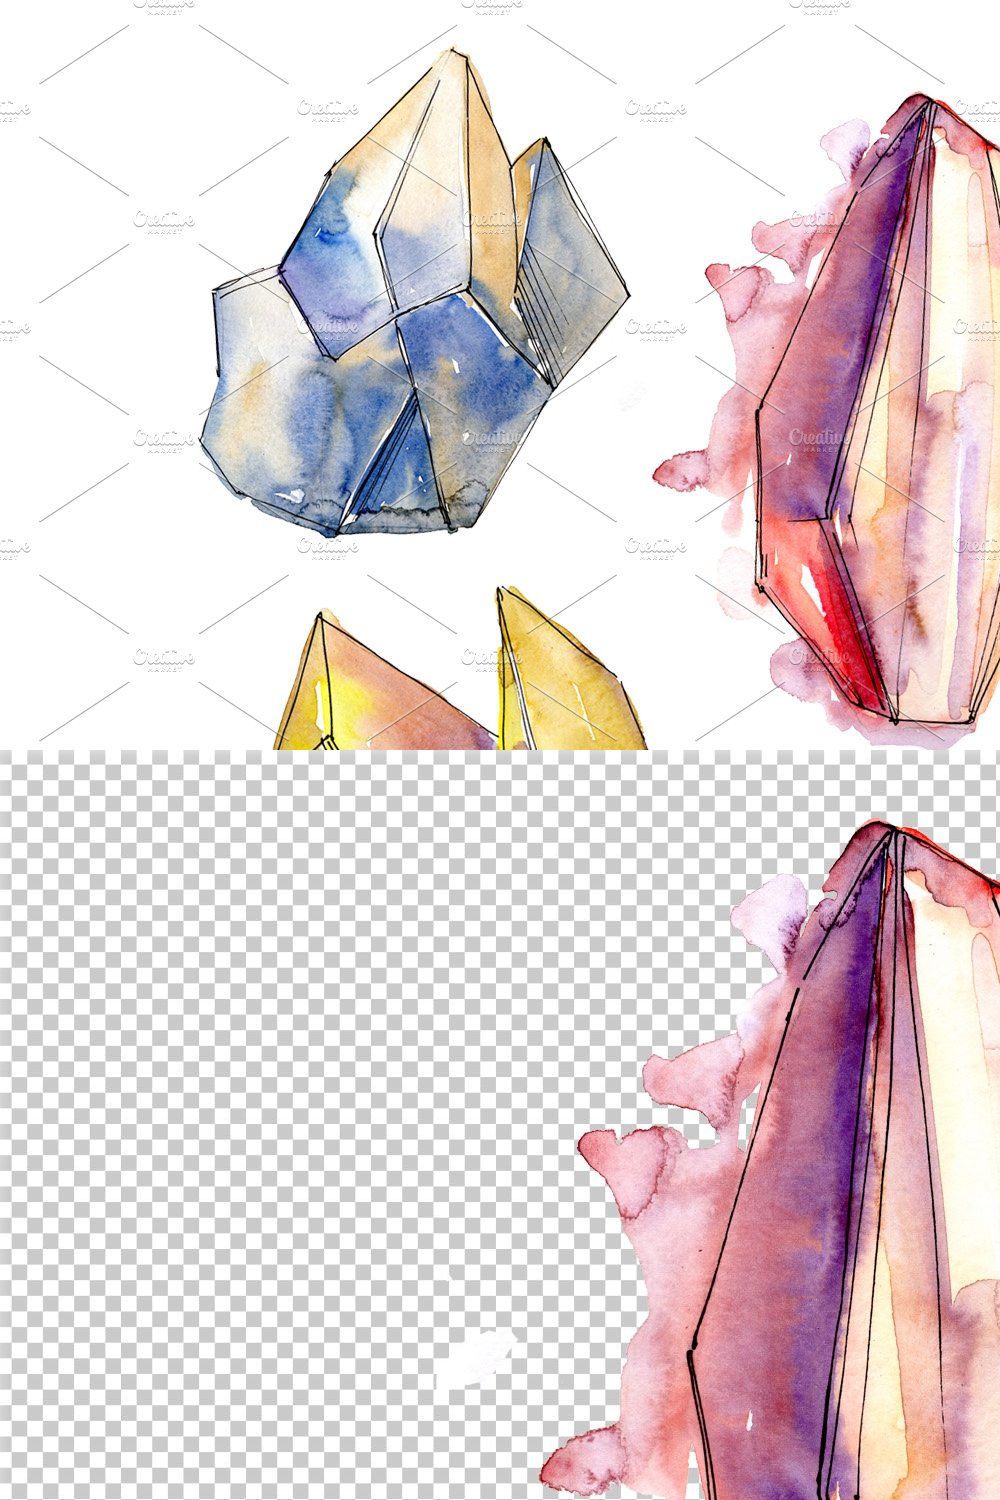 Cool crystals PNG watercolor set pinterest preview image.